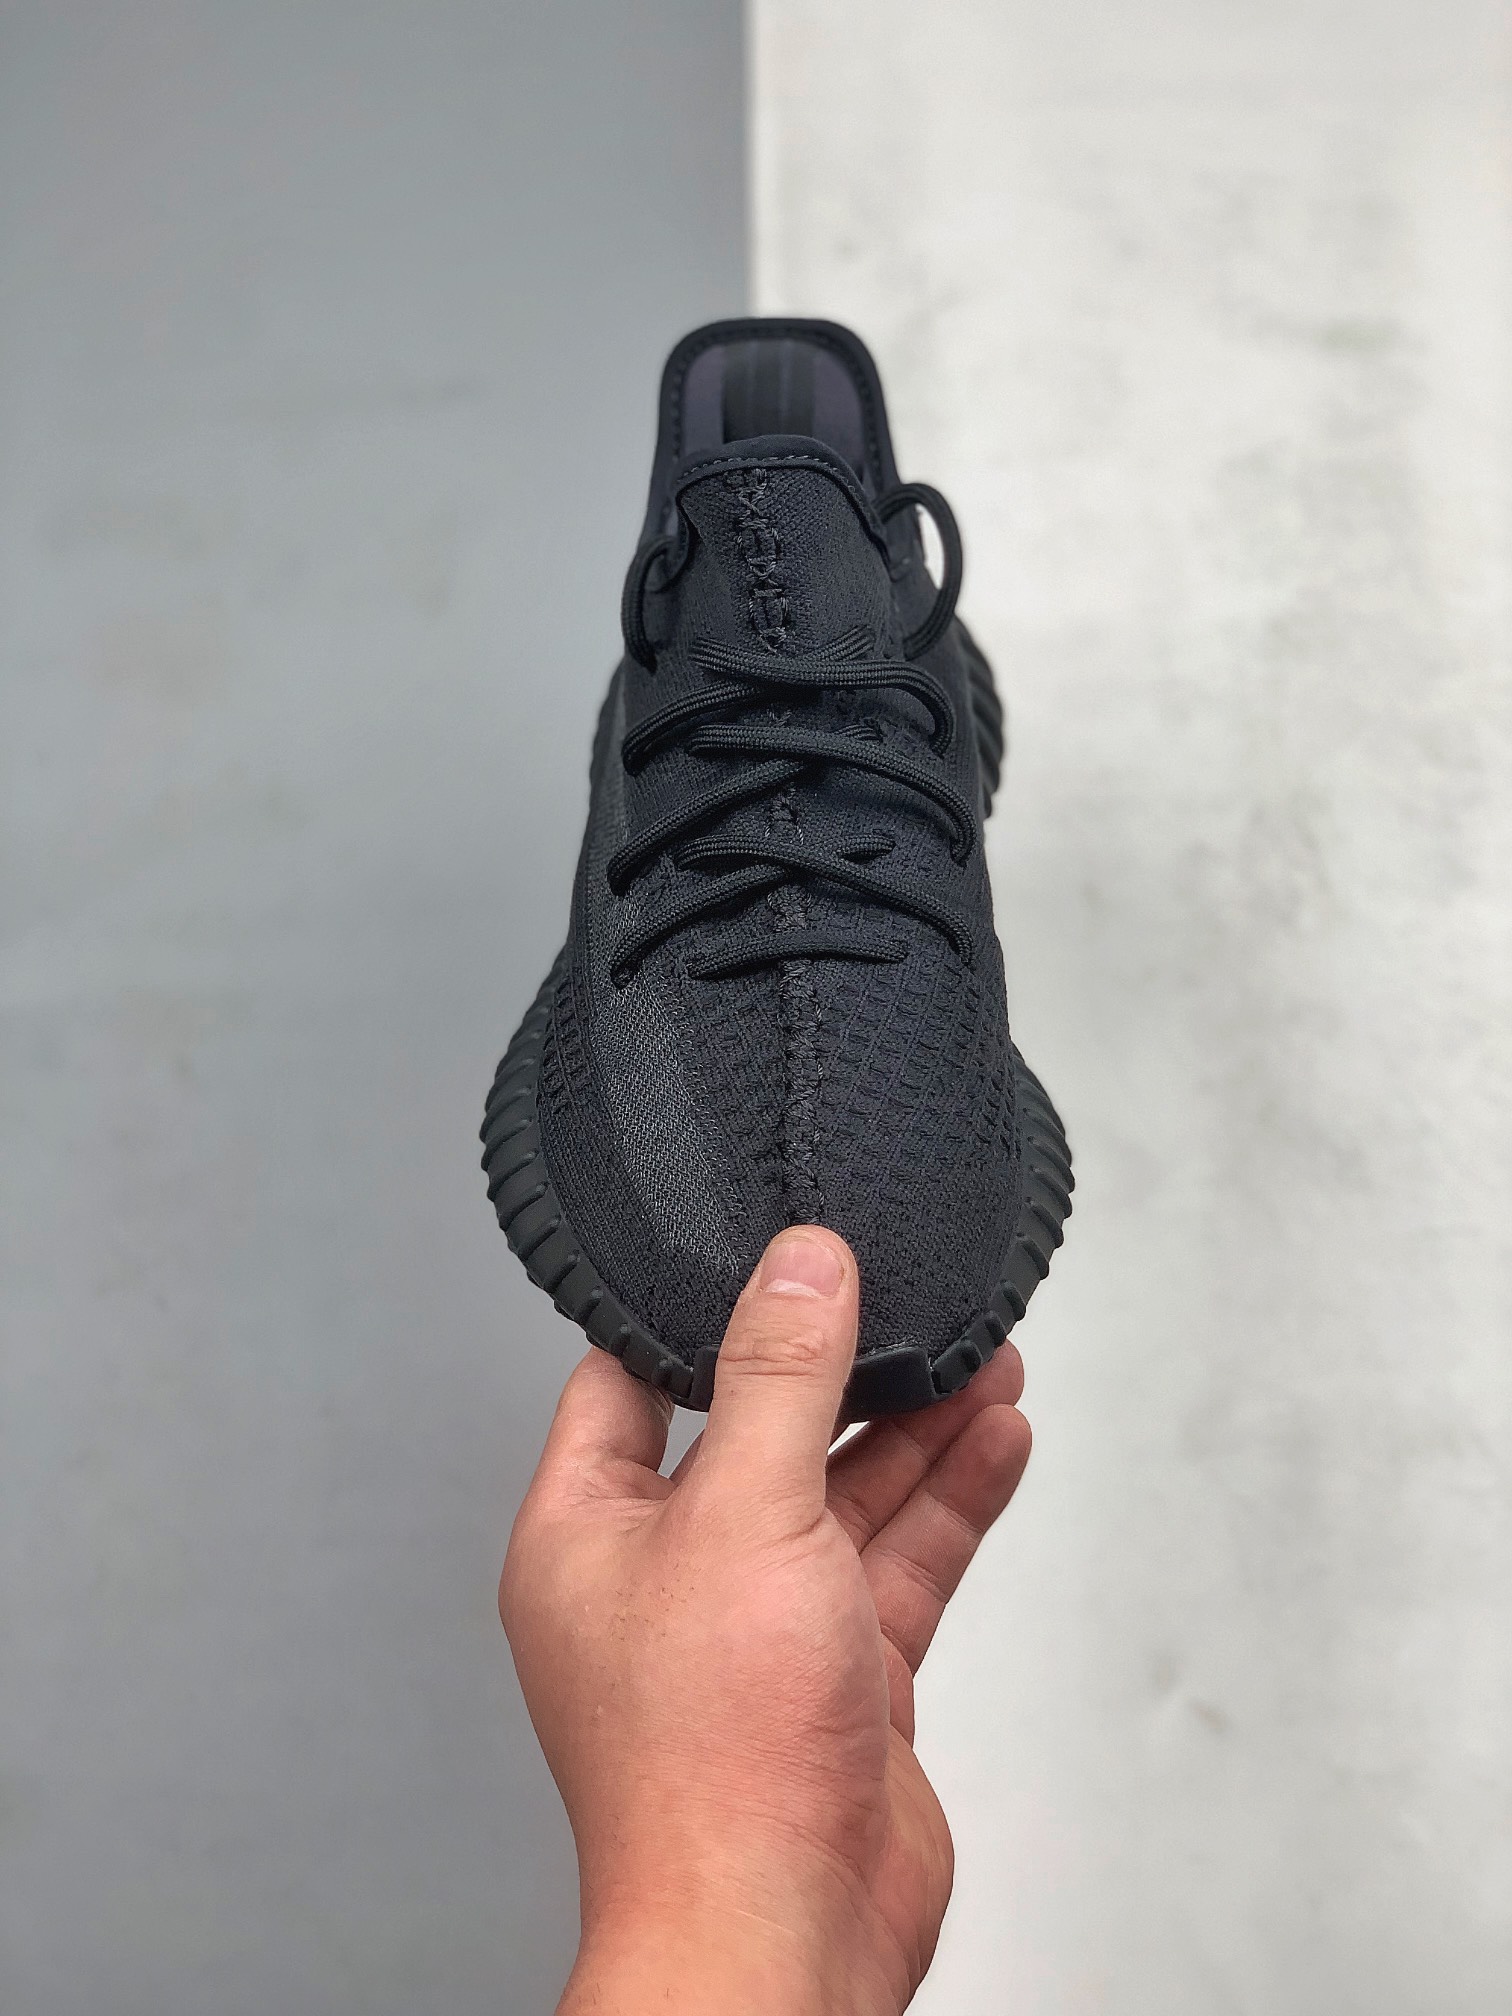 Adidas Yeezy Boost 350 V2 Cinder FY2903 - Shop Authentic Adidas Sneakers